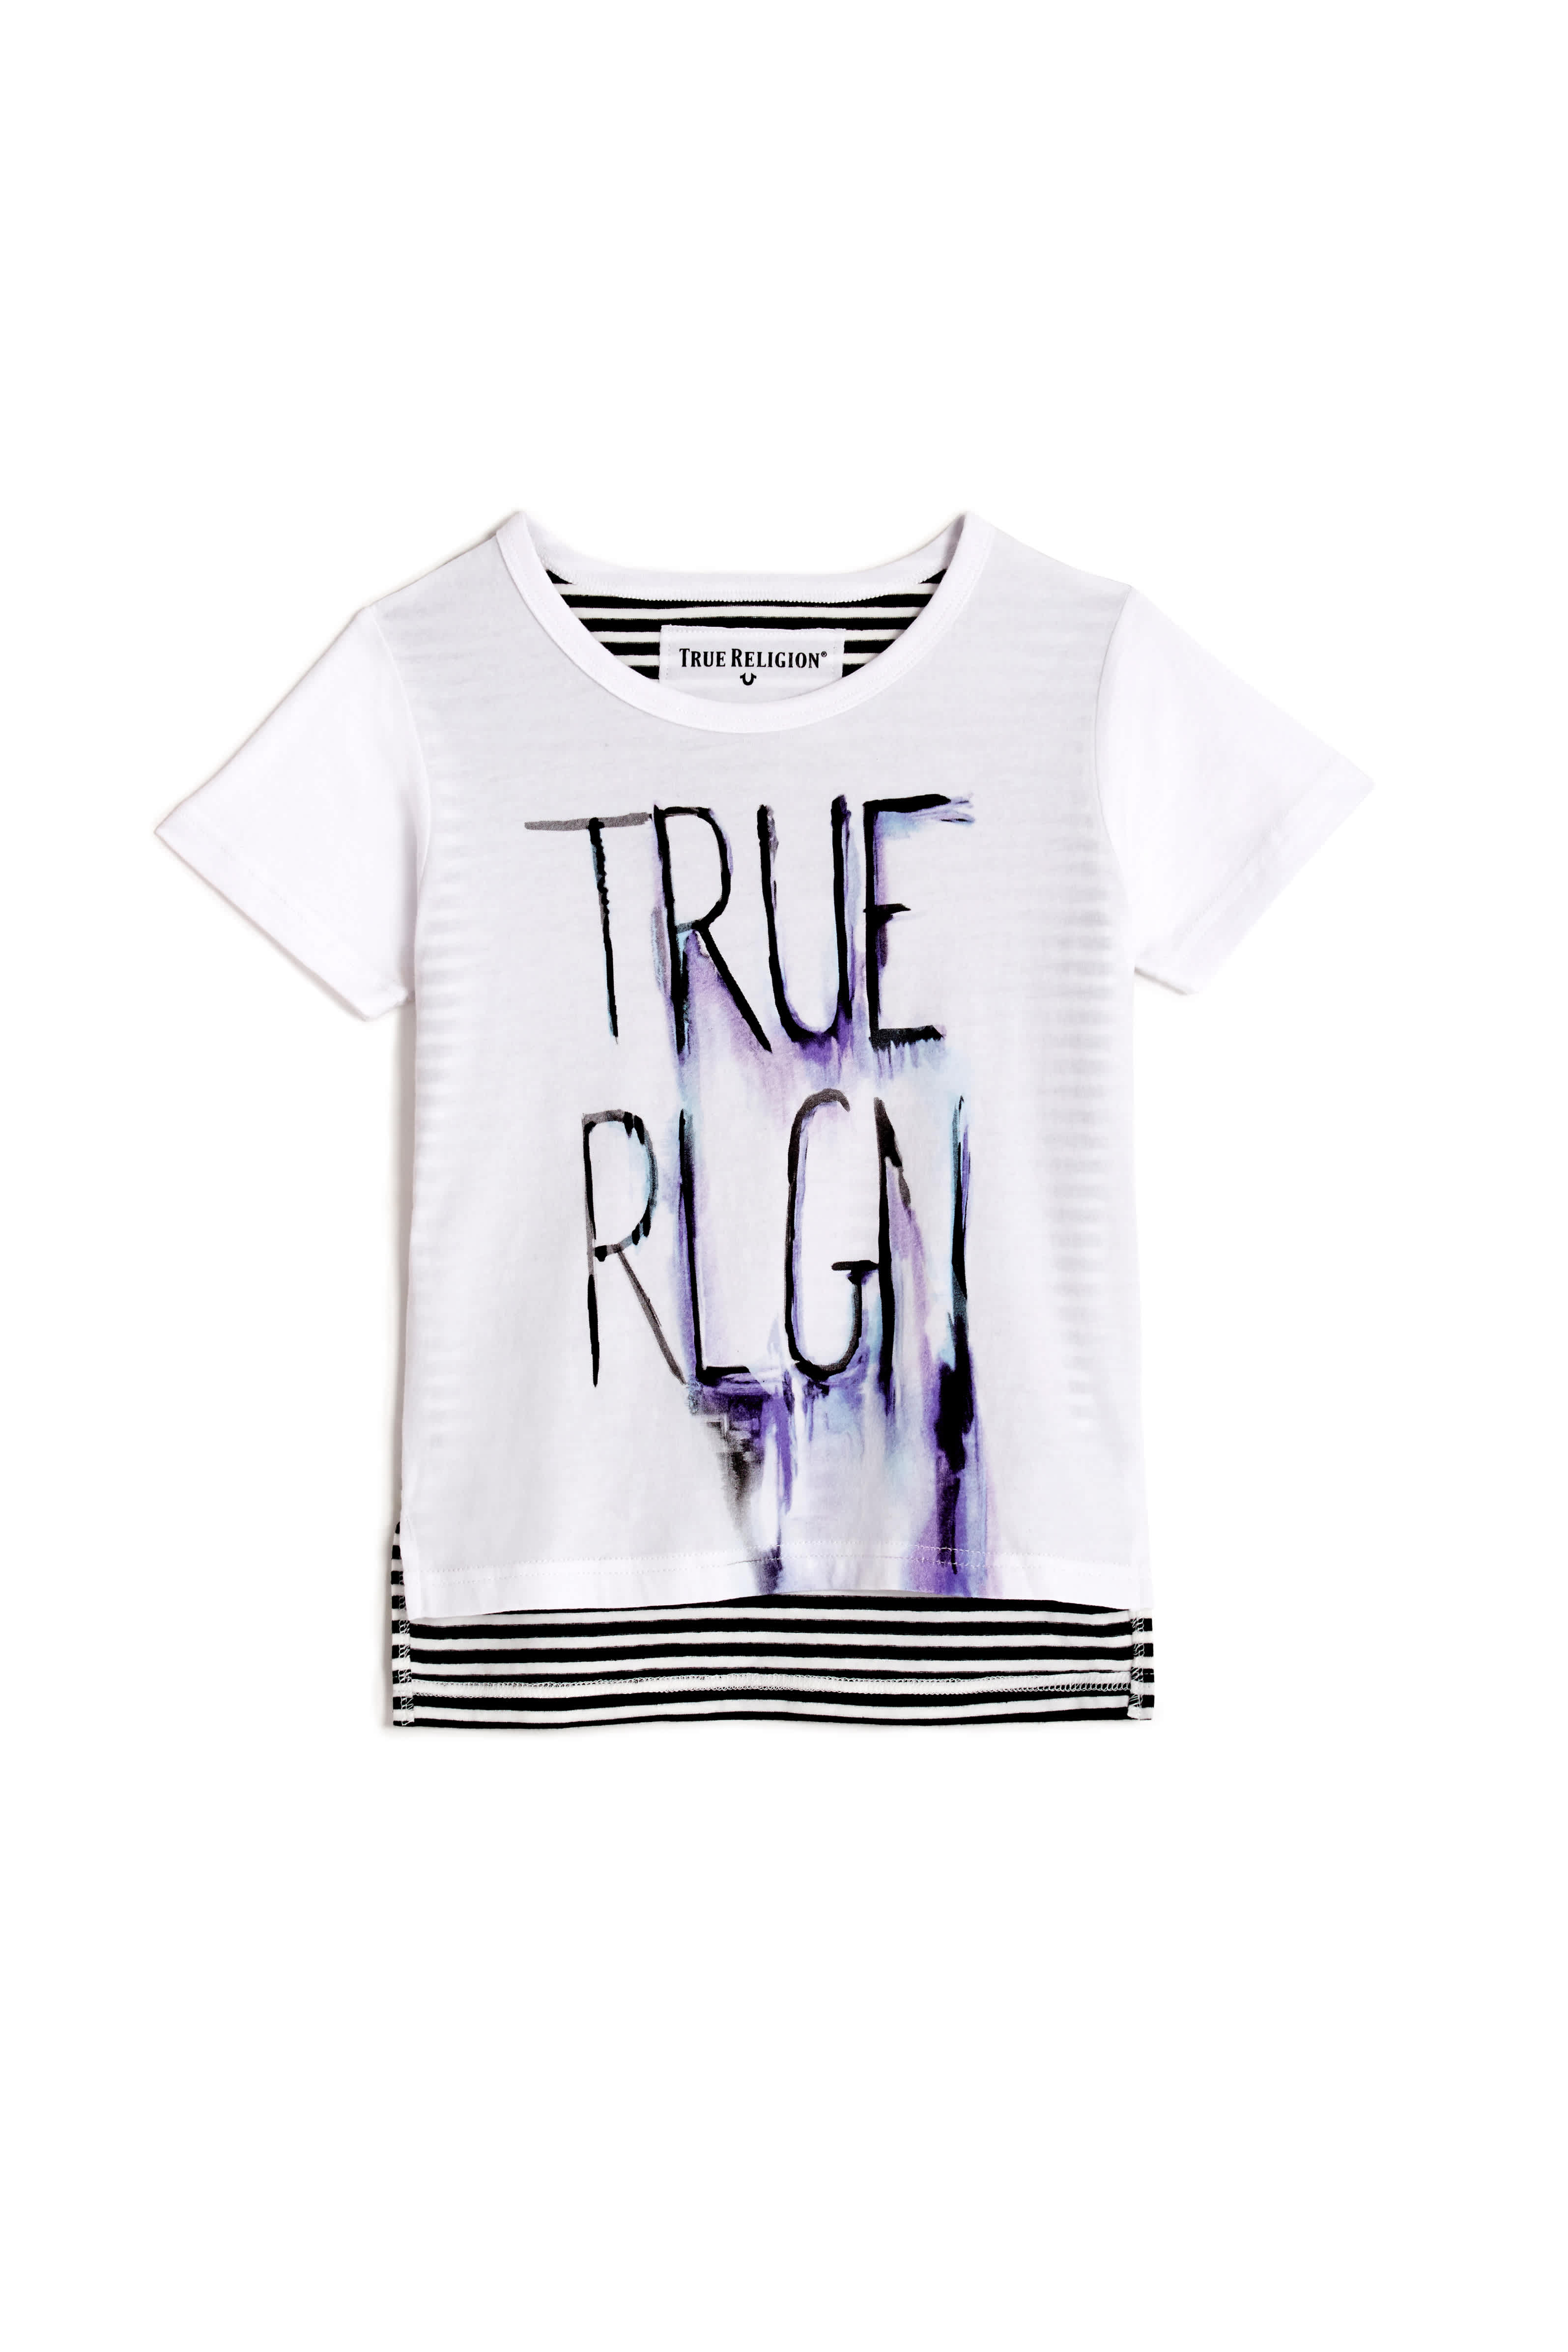 TODDLER/LITTLE KIDS SKETCHED STRIPE GRAPHIC TEE